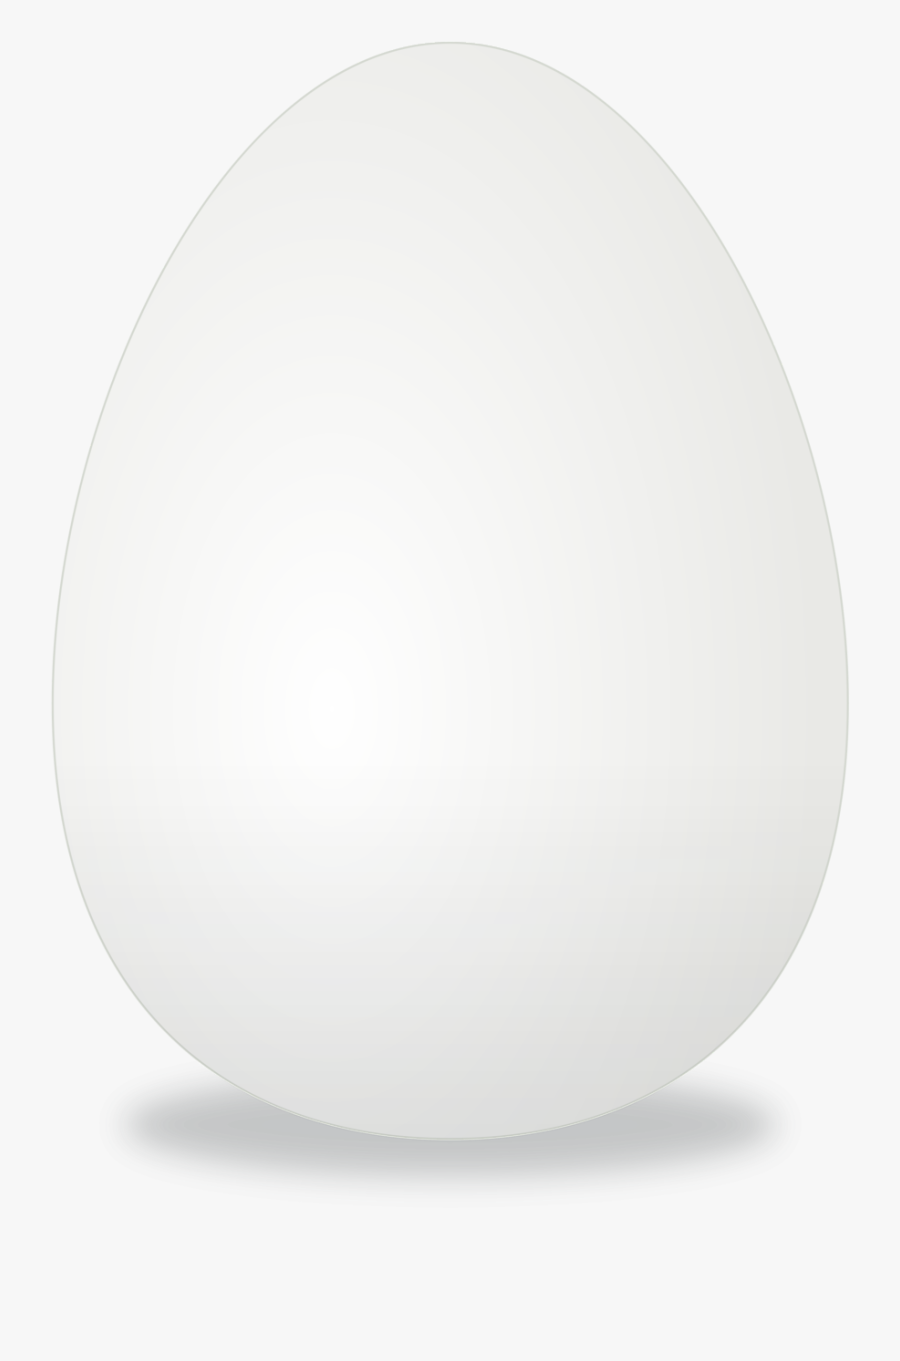 Eggs Clipart Clear Background - White Egg Png, Transparent Clipart